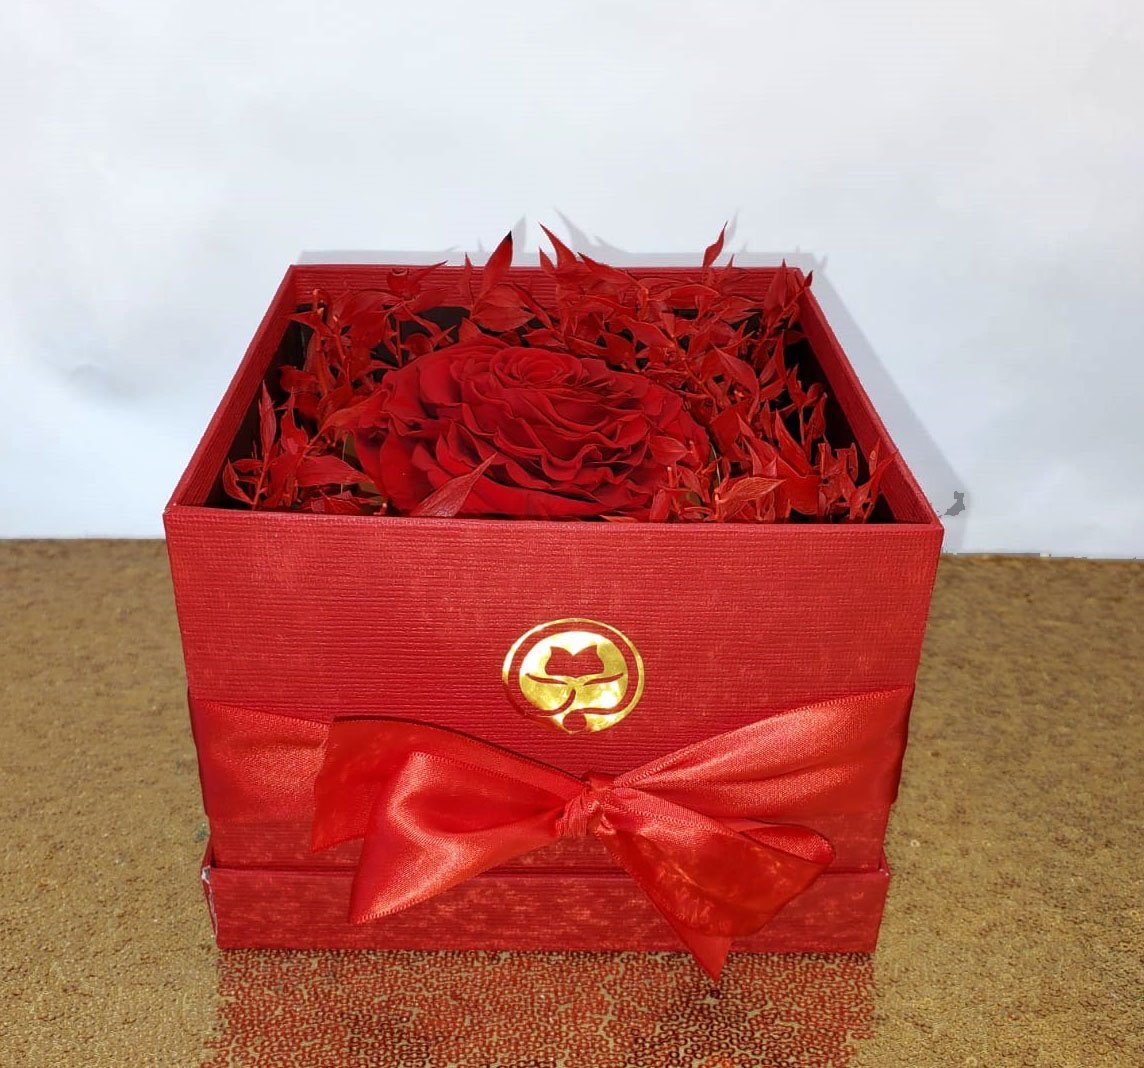 Red Heart Box 001-Shaped Preserved Rose